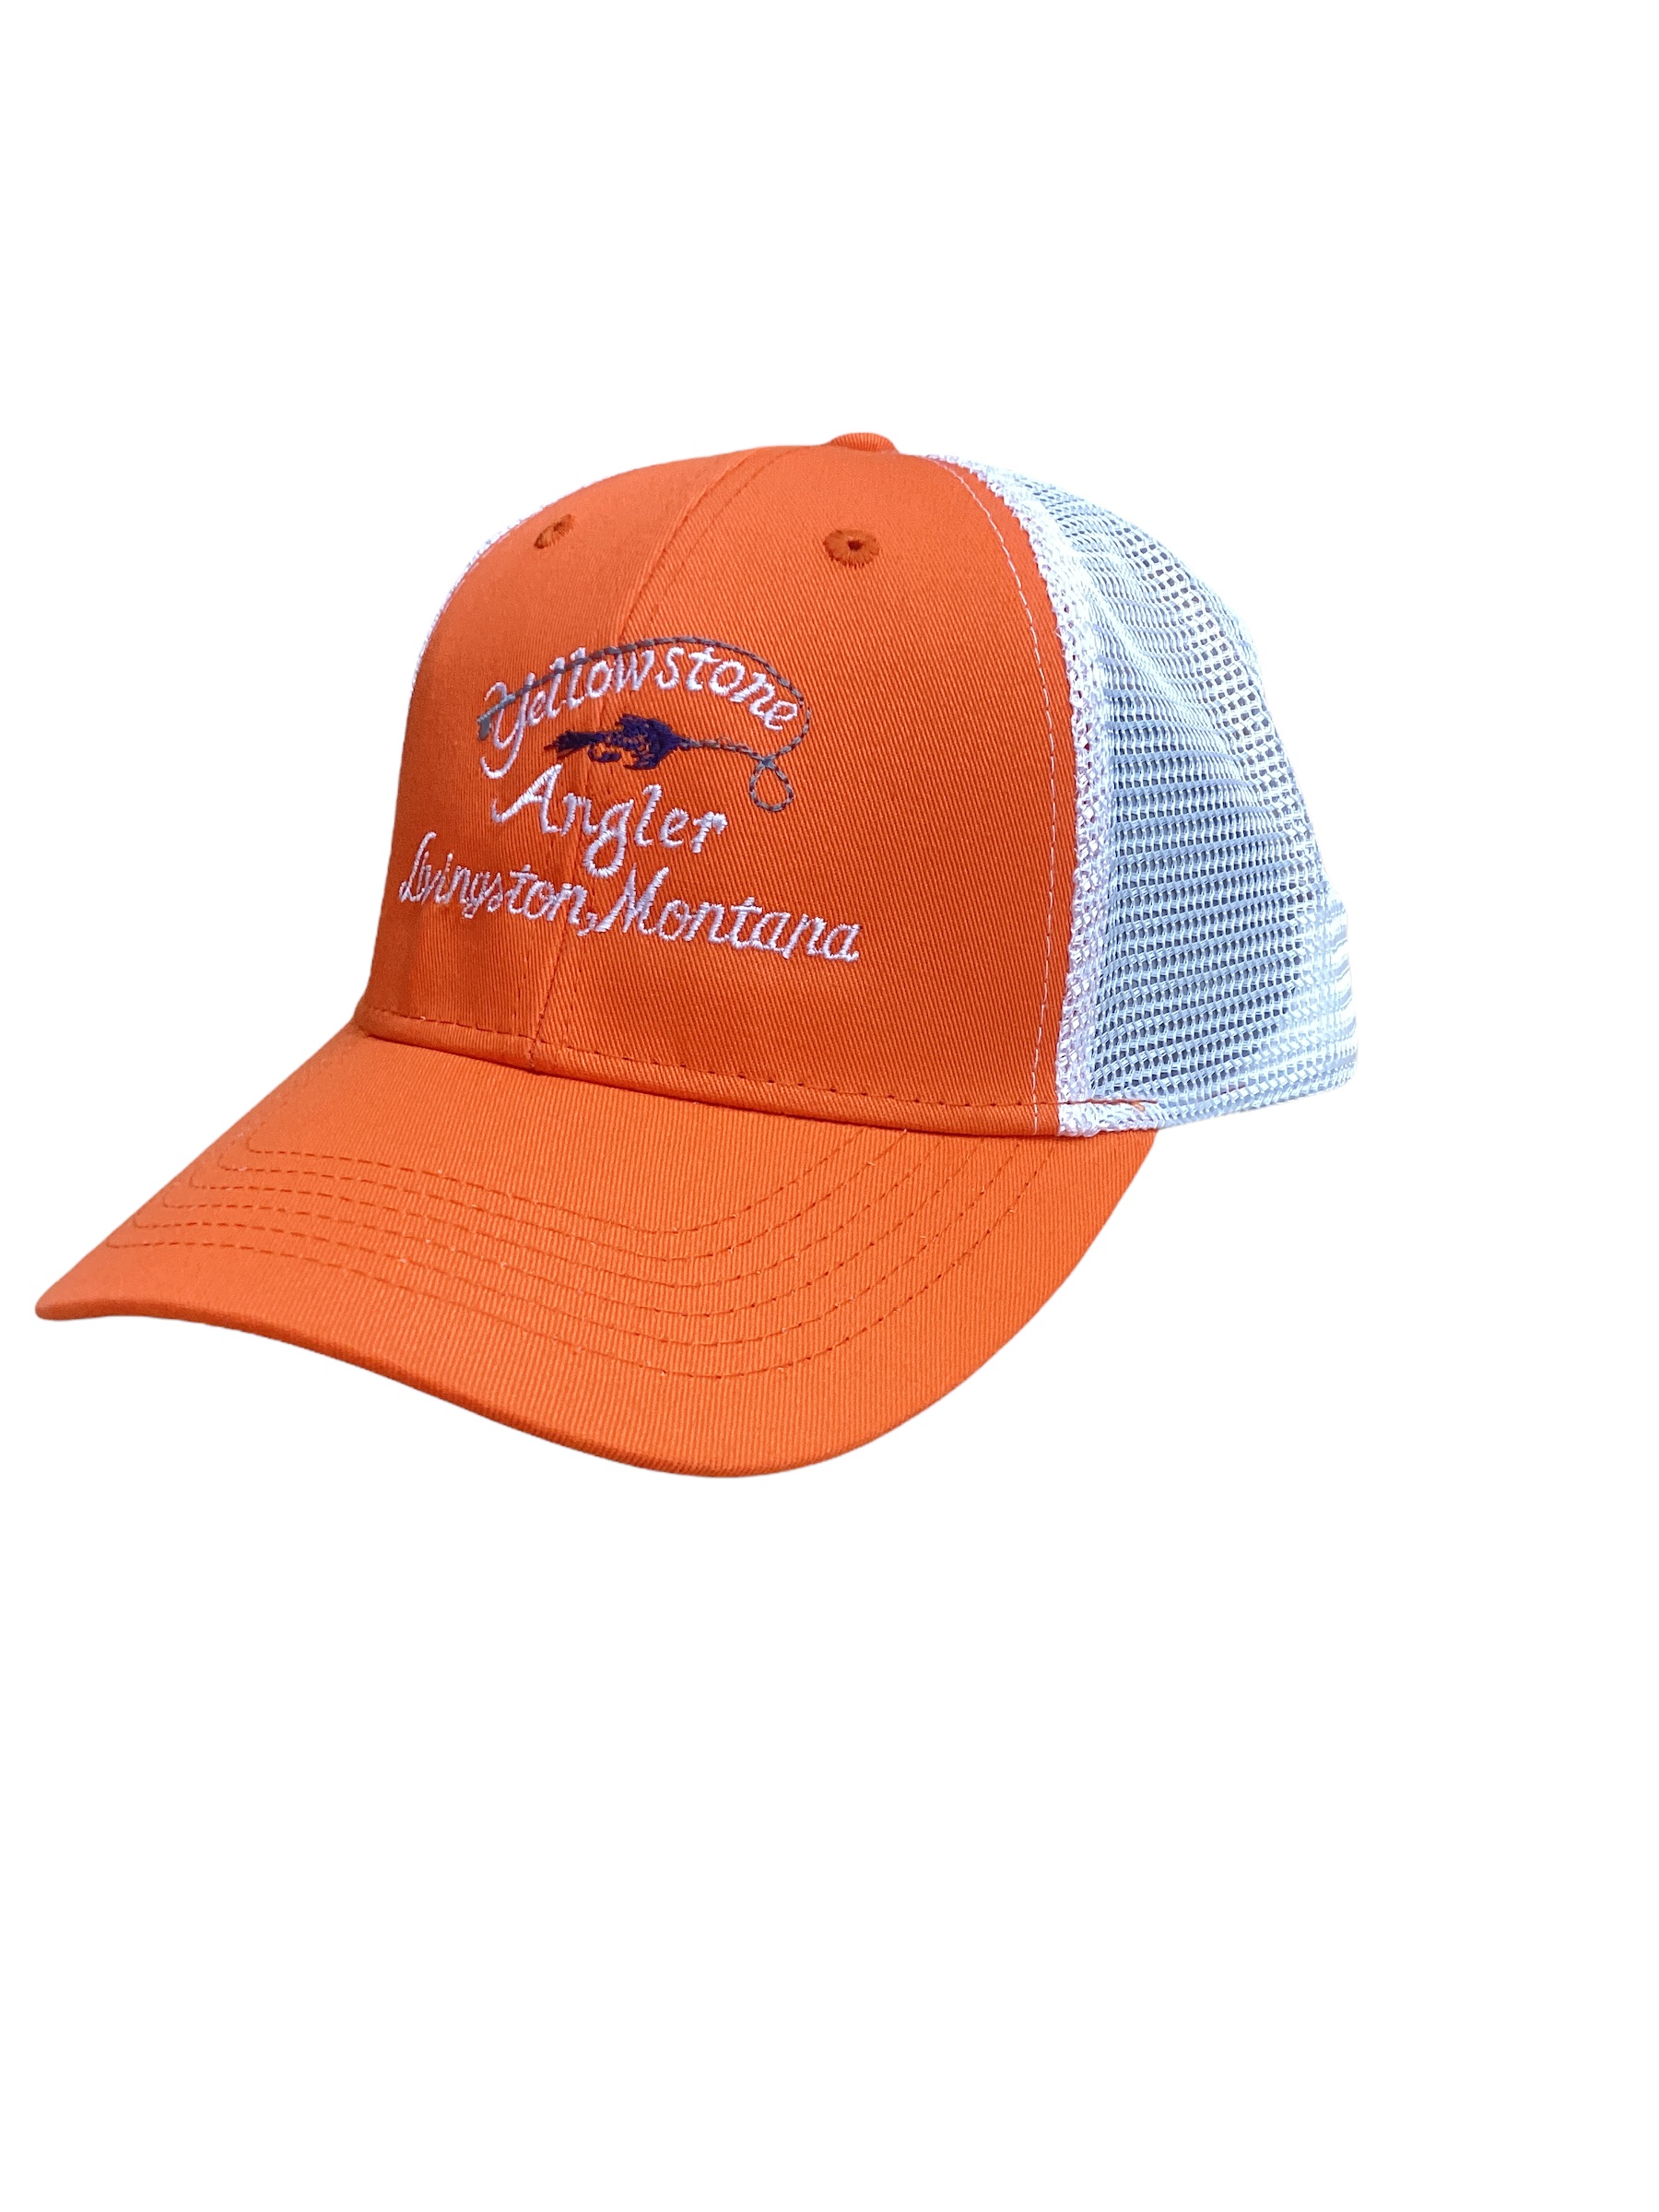 Shop For Yellowstone Fly Fishing Gear » Online Inventory Angler »